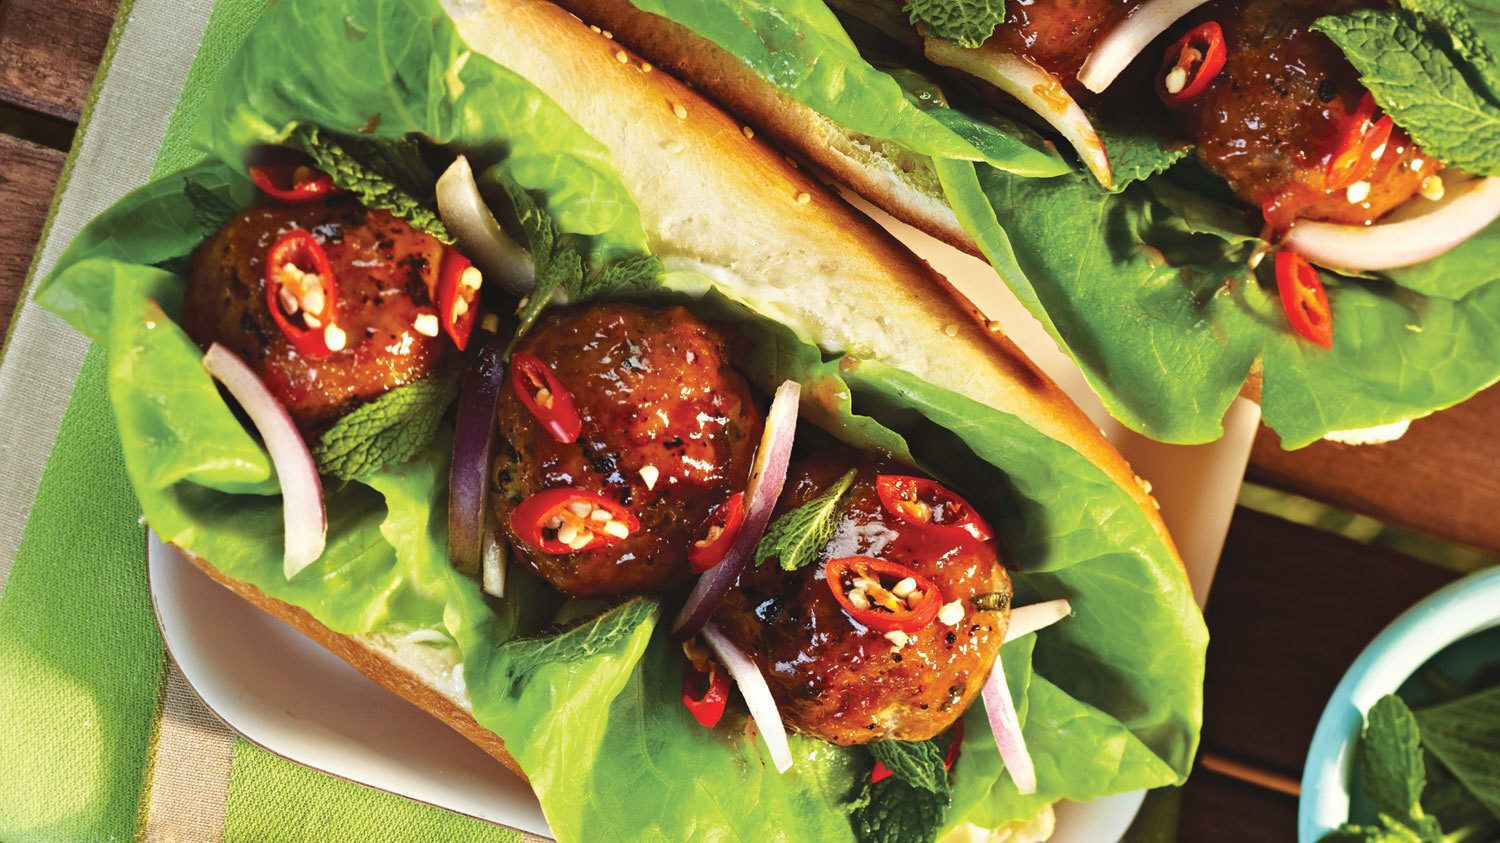 Read more about Grilled Turkey Meatballs on a Bun